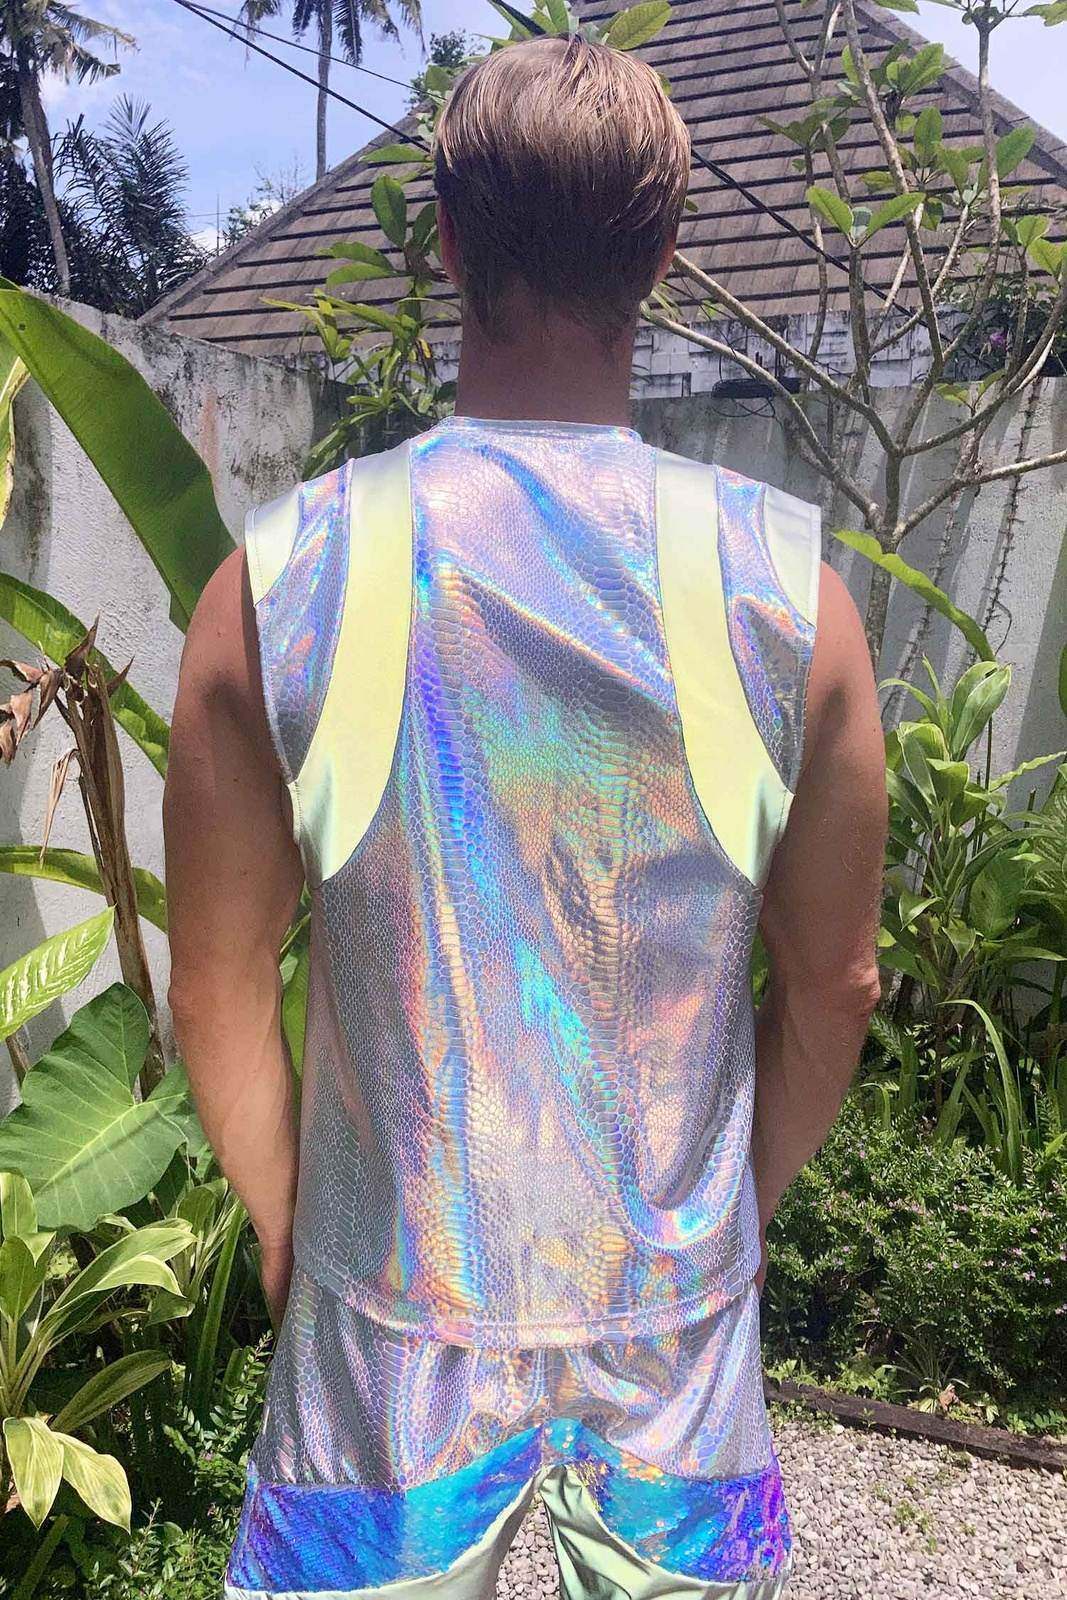 Mens Festival tank top in holographic white snakeskin fabric from Love Khaos